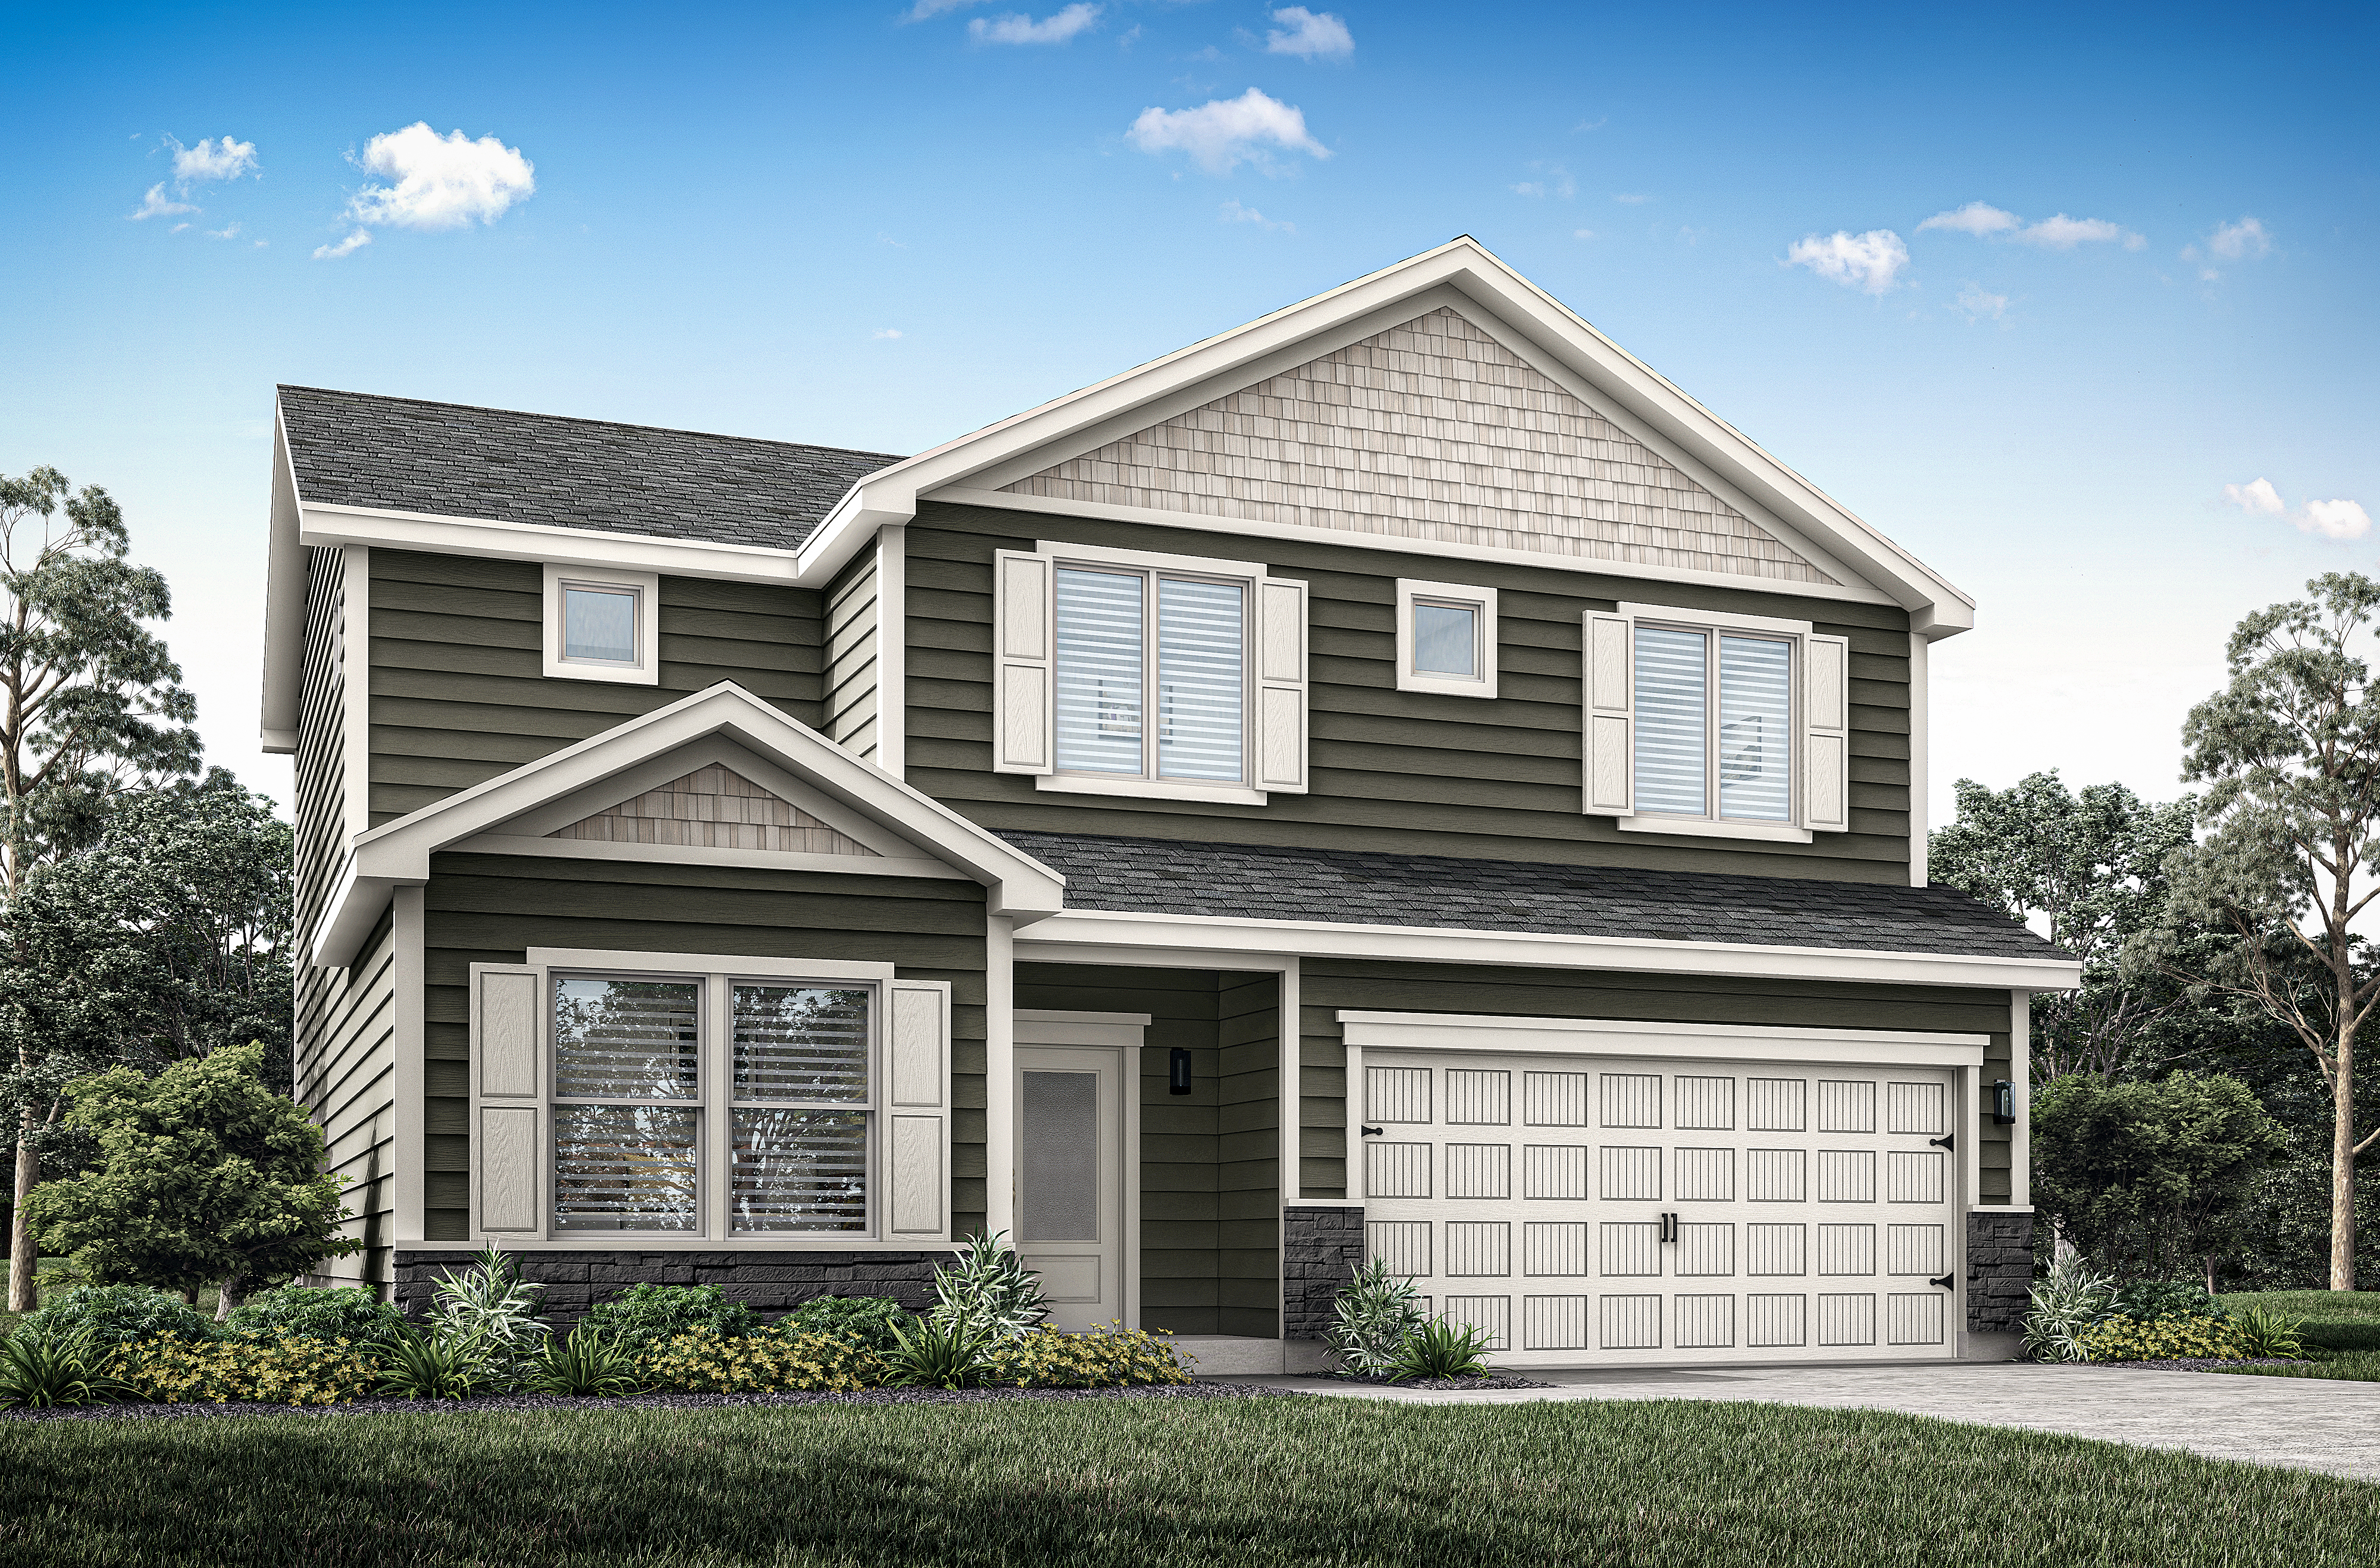 Artist Rendering of the Henry Plan at Cambridge Cove by LGI Homes located in Cambridge, north of Minneapolis.